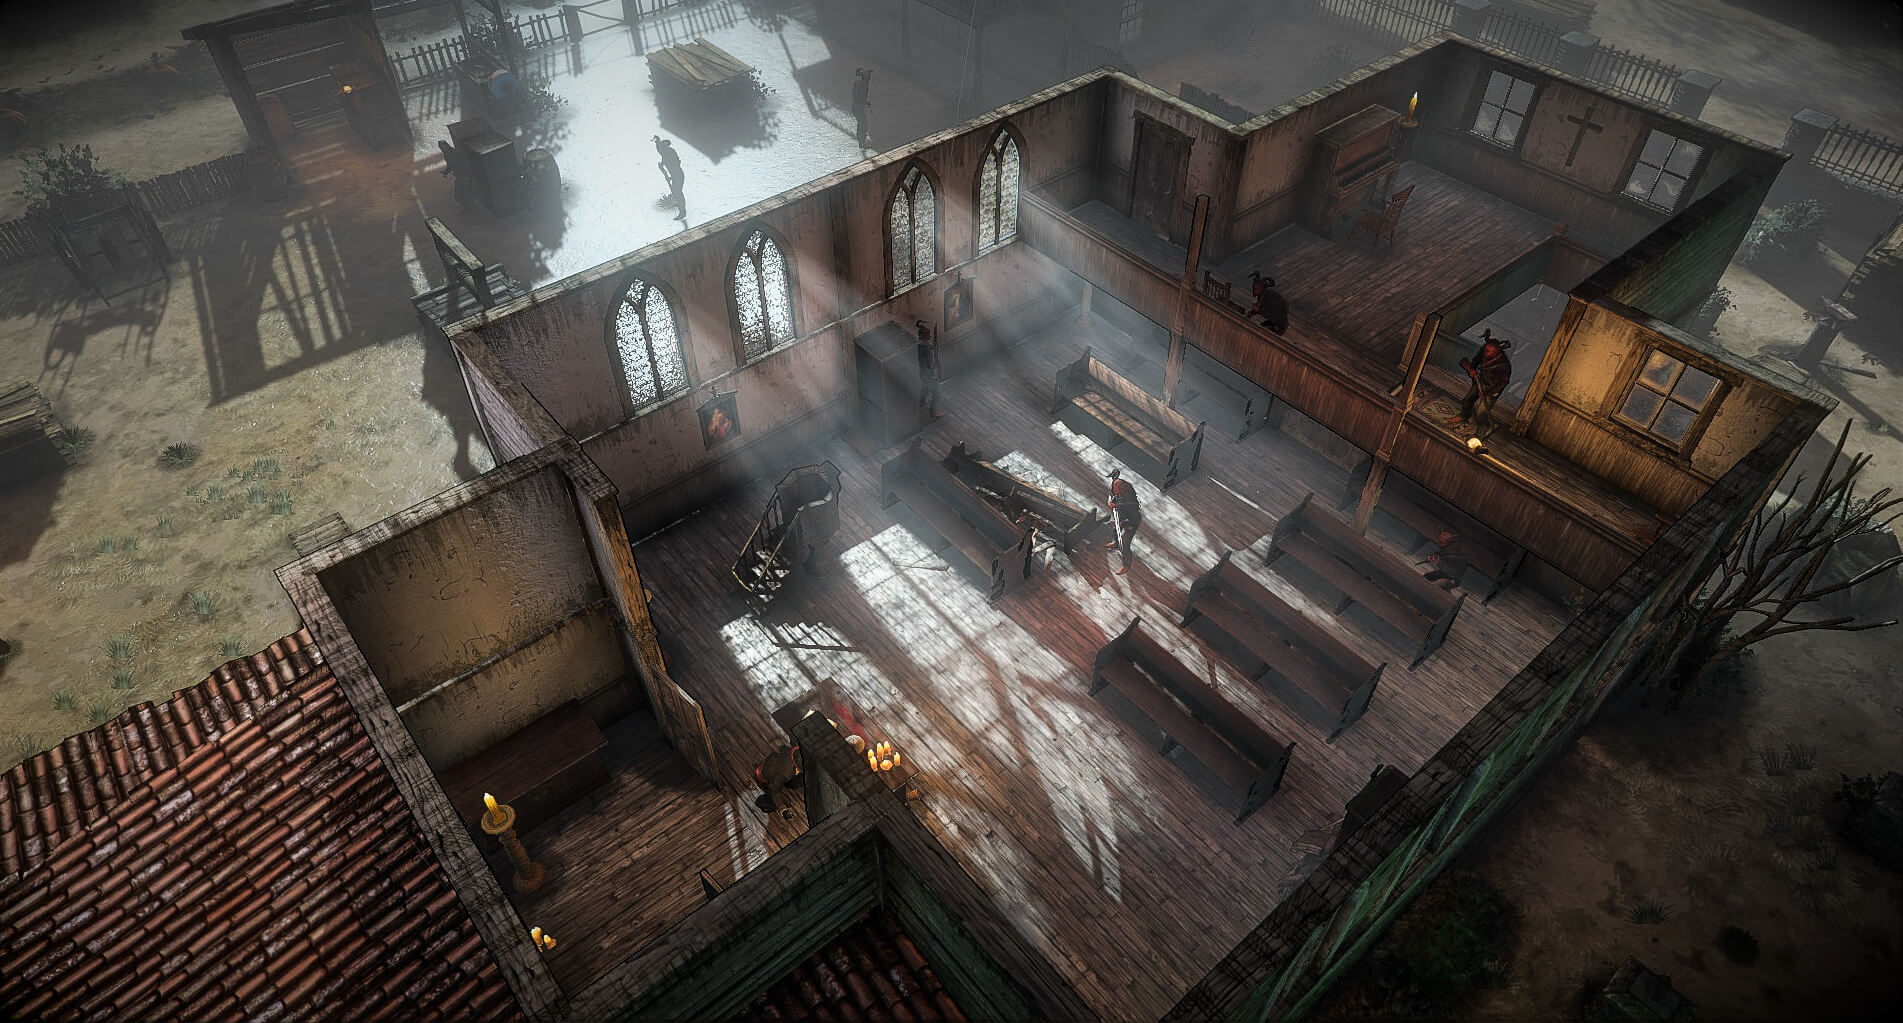 Hard West playable at gamescom and PAX Prime, releasing this fall